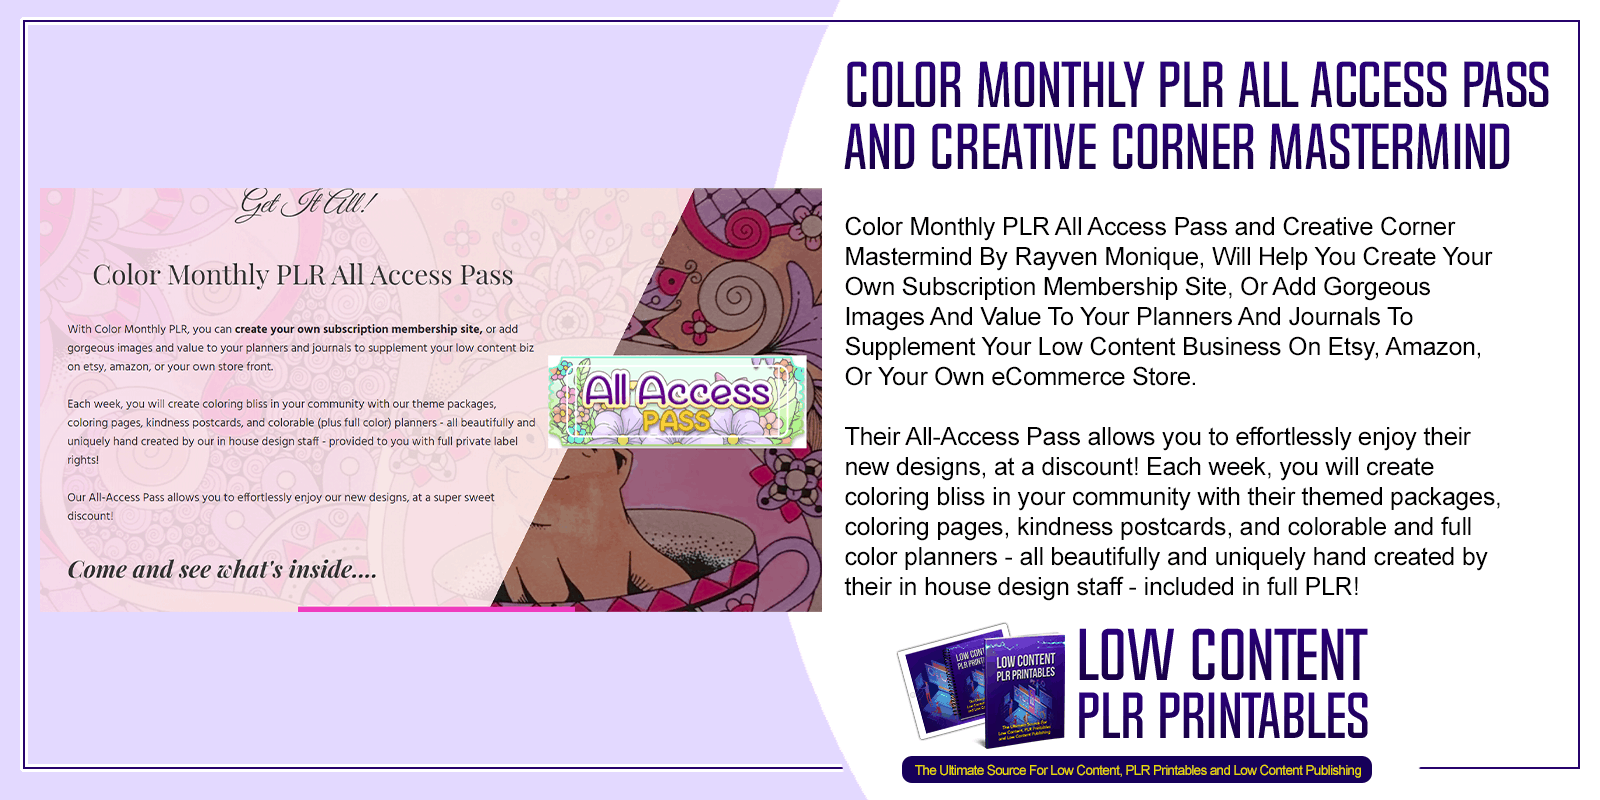 Color Monthly PLR All Access Pass and Creative Corner Mastermind